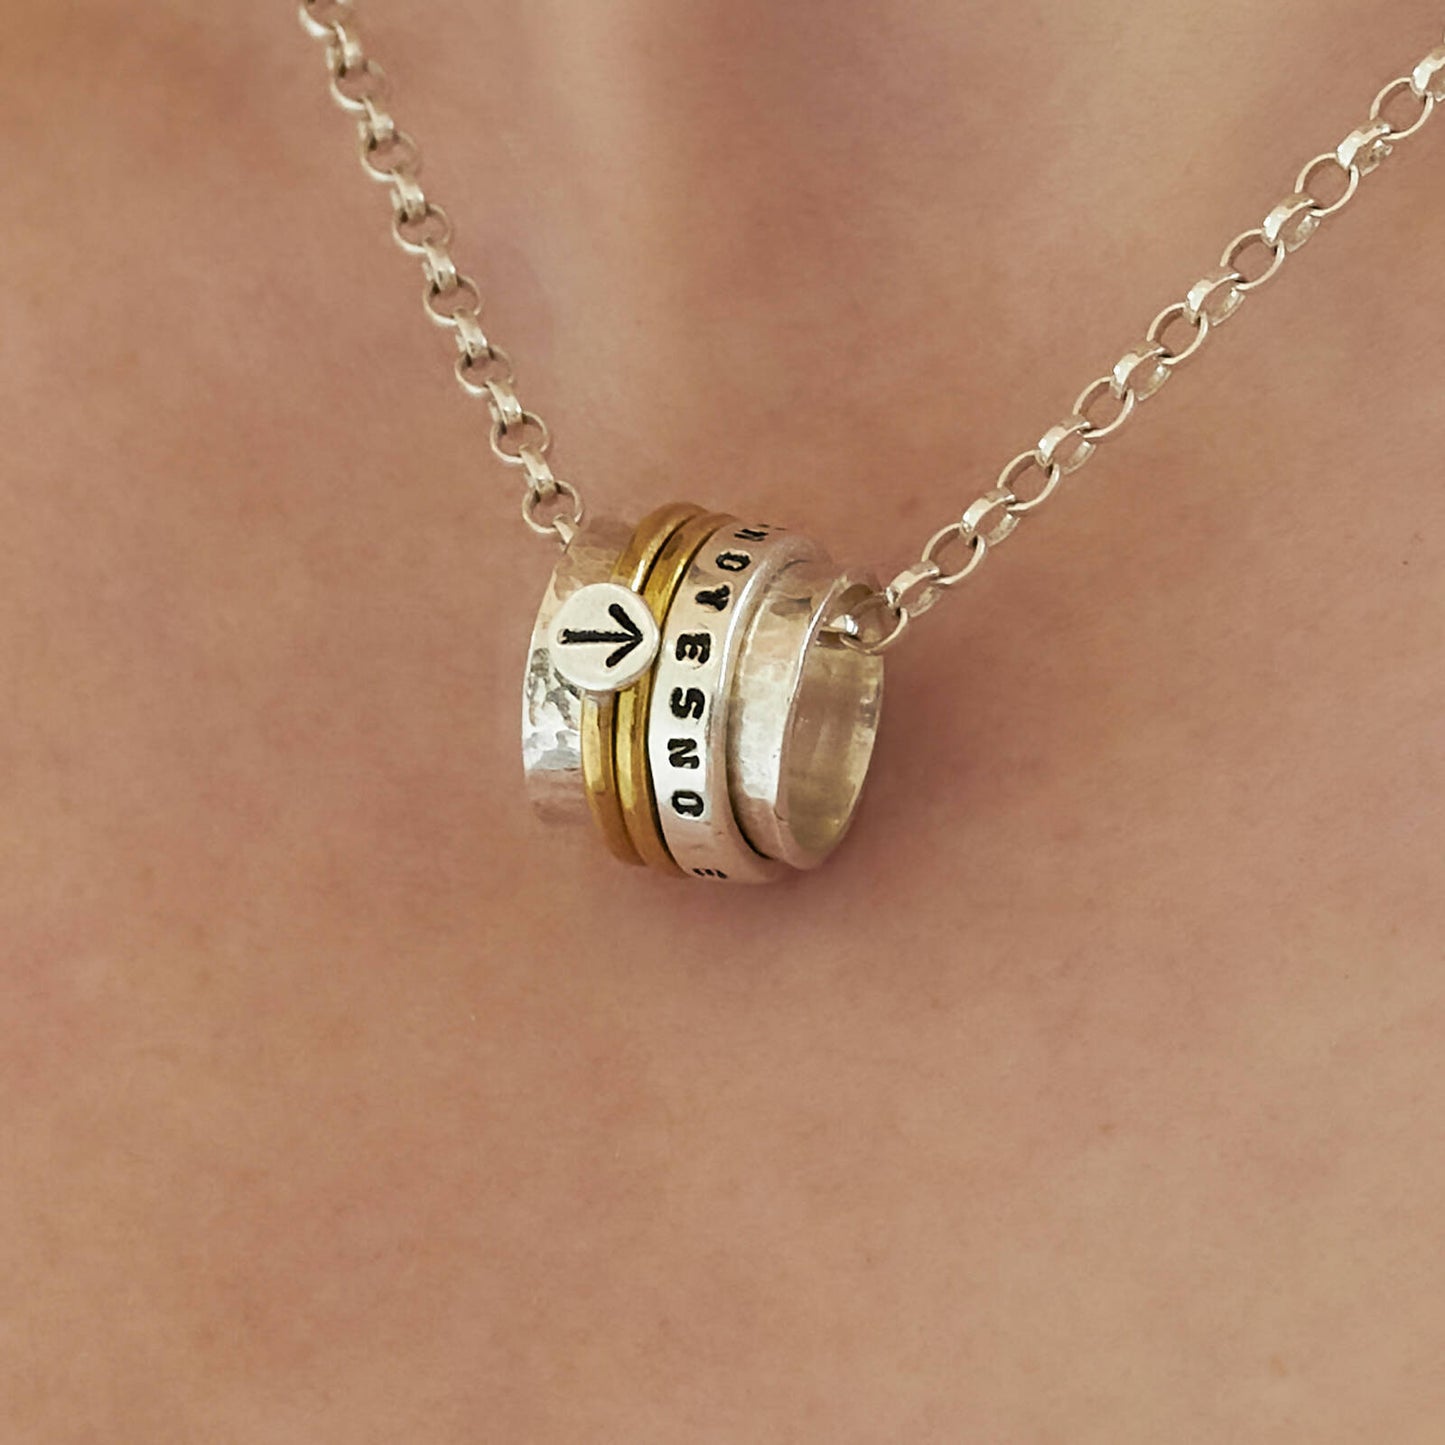 The YES/NO Spinning Necklace by Emma White